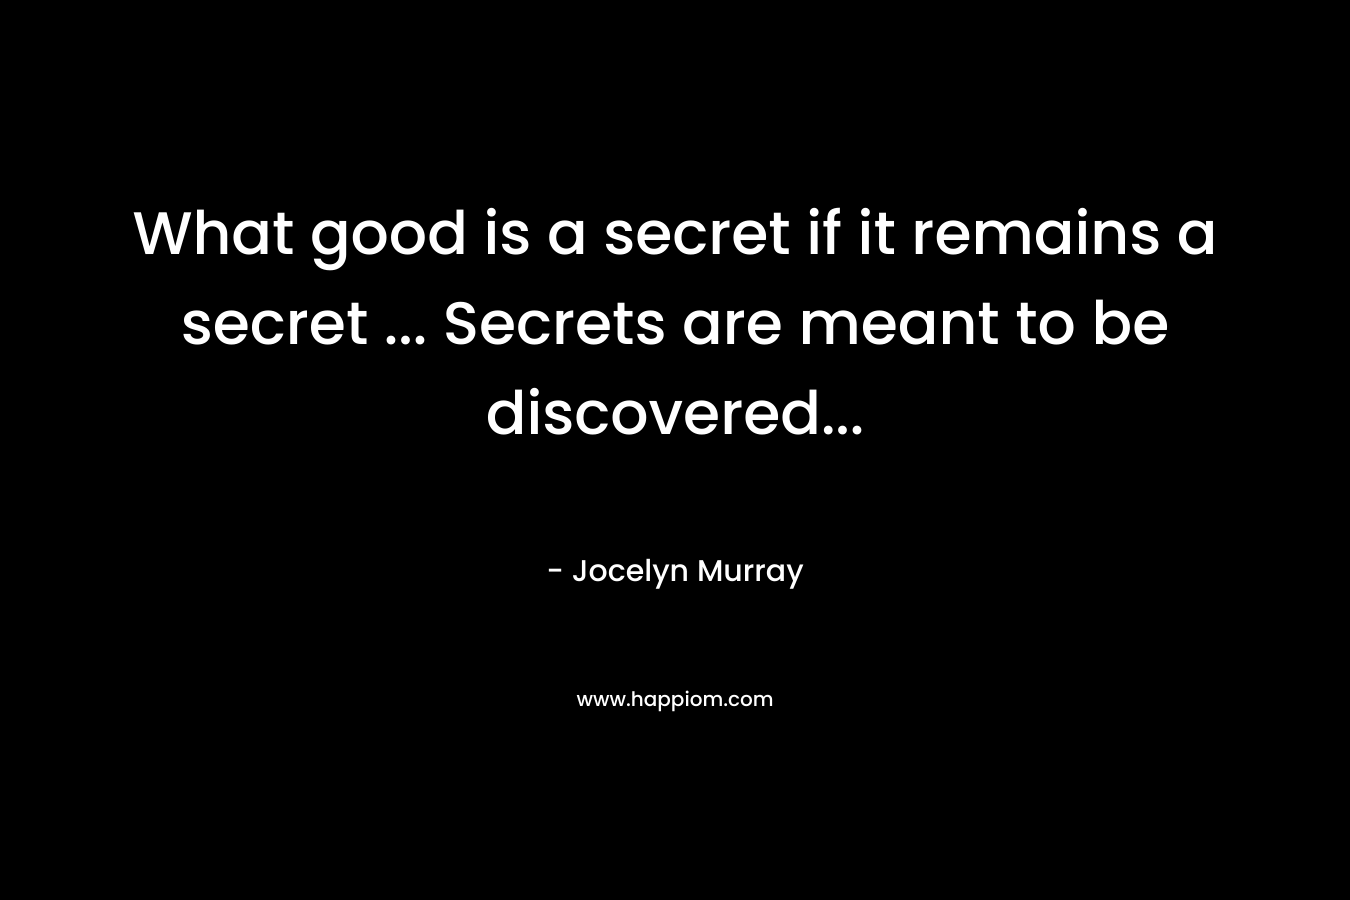 What good is a secret if it remains a secret ... Secrets are meant to be discovered...